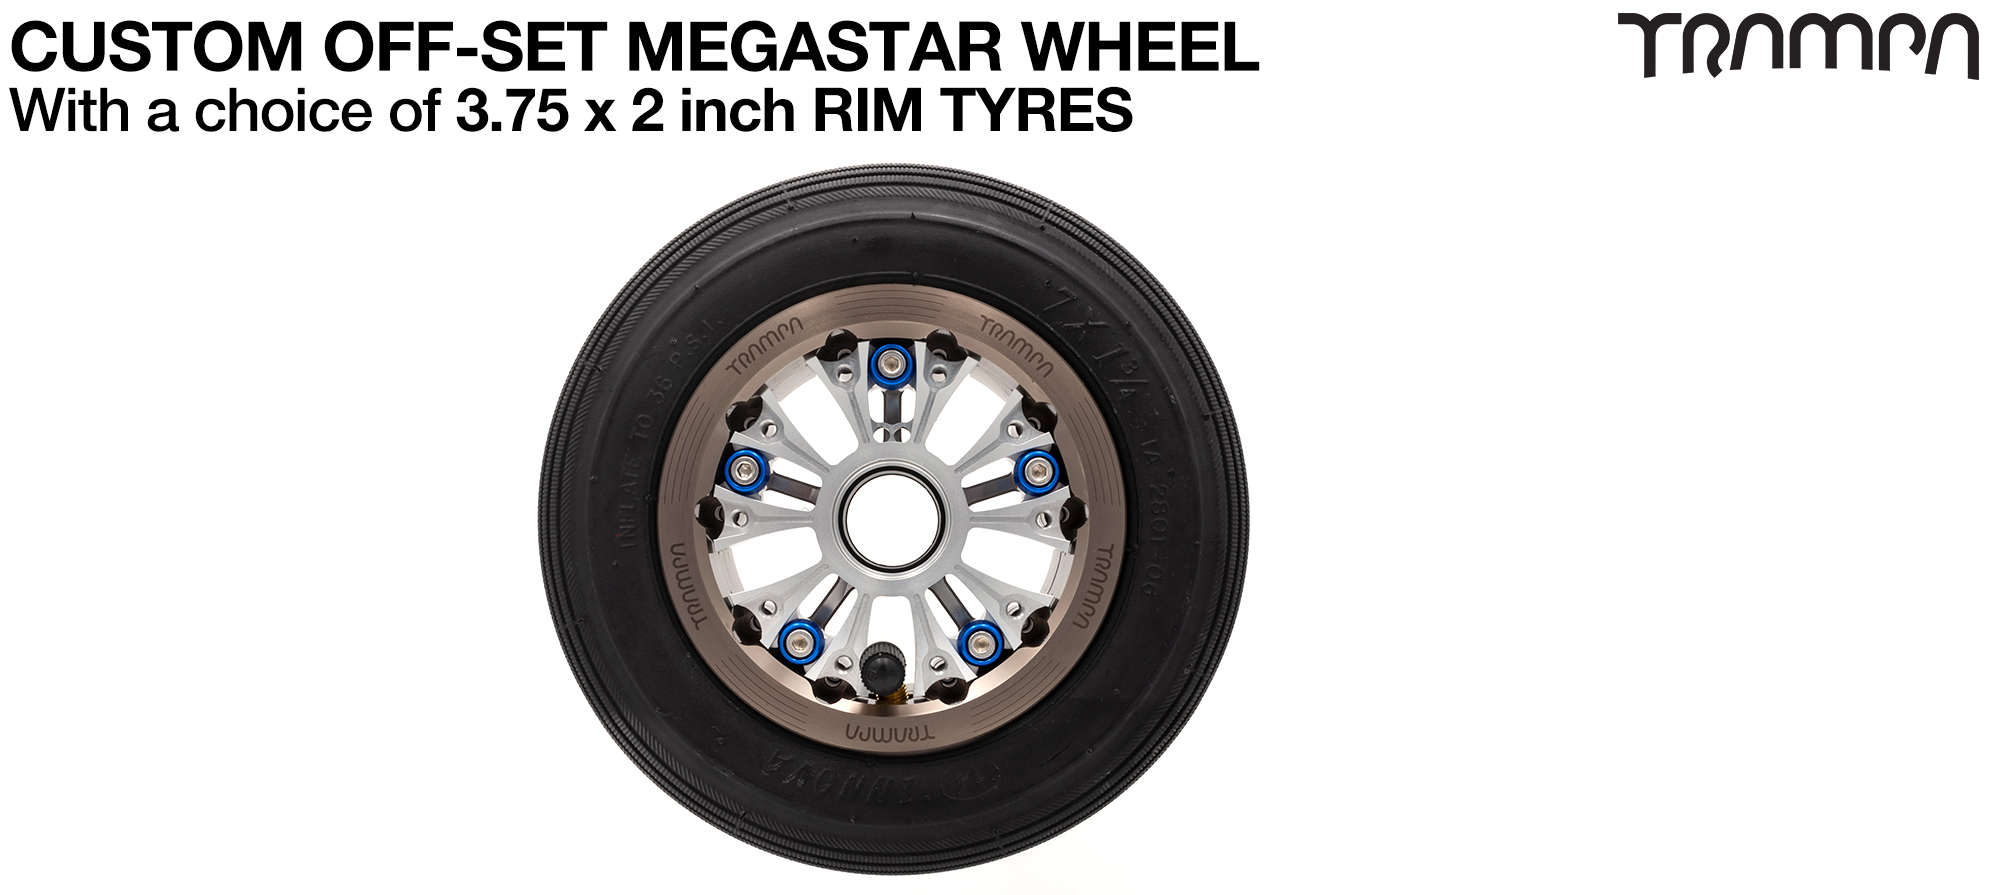 OFF-SET MEGASTAR 8 Wheel 3.75 x 2 Inch - Fits all TRAMPA Tyres up to 8 Inch - 7 Inch INLINE Tyres 